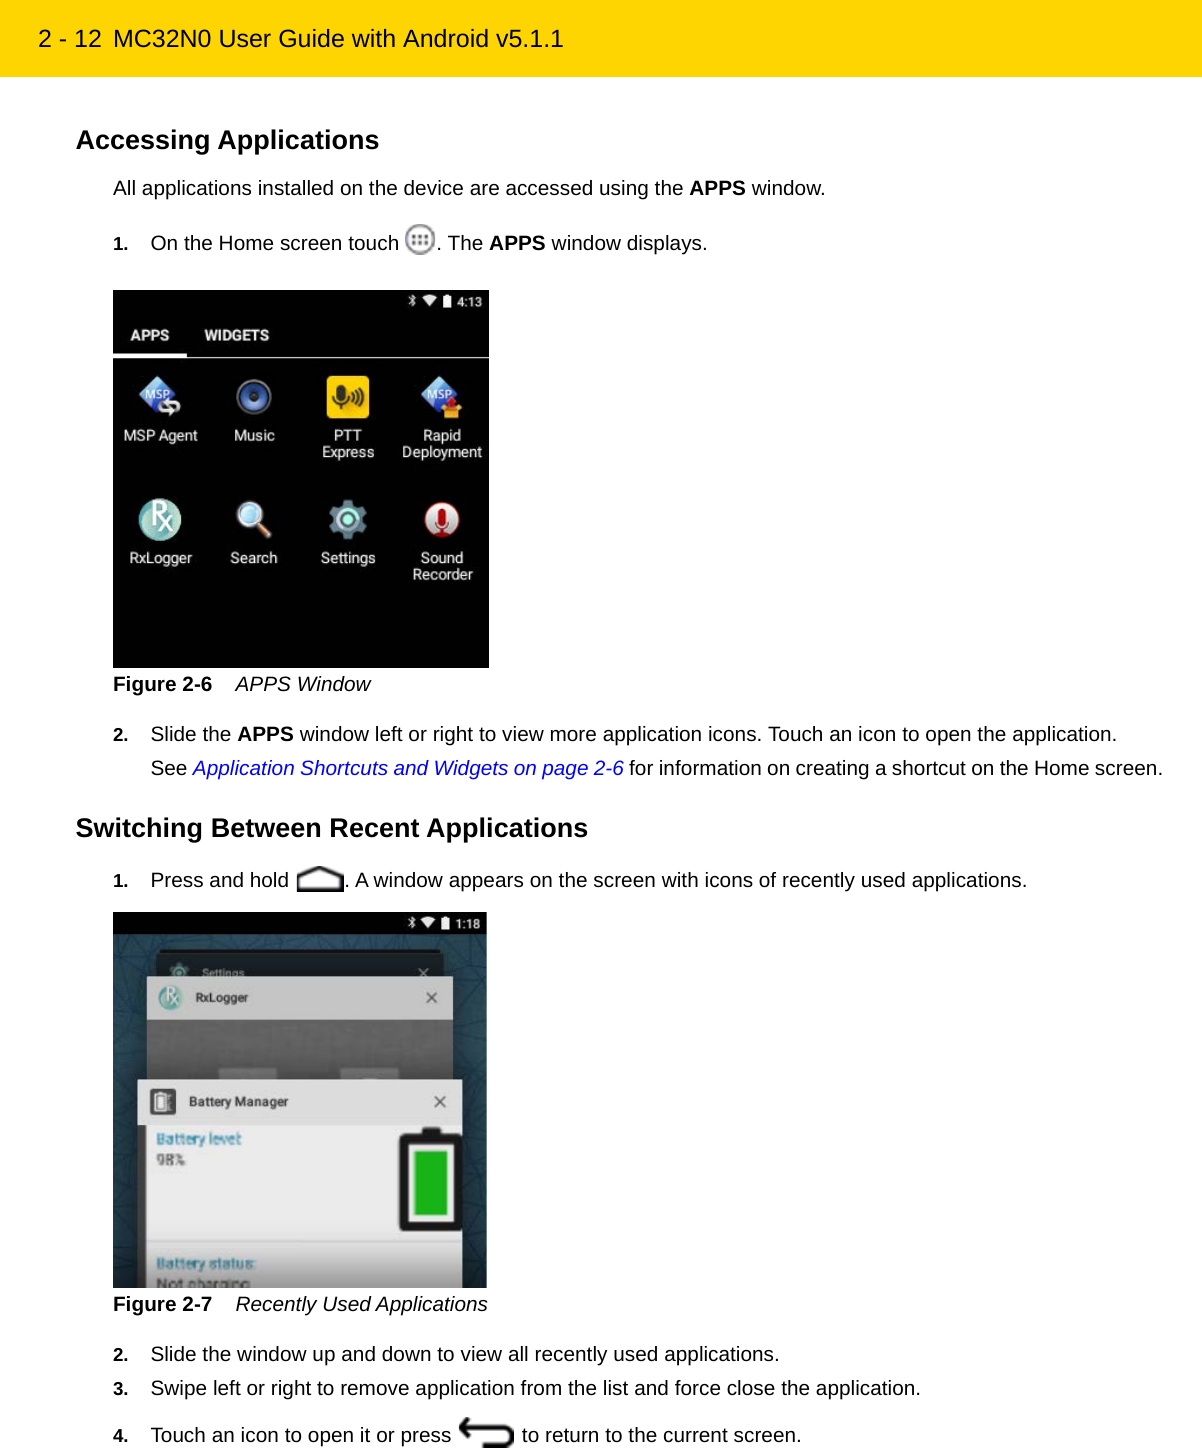 2 - 12 MC32N0 User Guide with Android v5.1.1Accessing ApplicationsAll applications installed on the device are accessed using the APPS window.1. On the Home screen touch  . The APPS window displays.Figure 2-6    APPS Window2. Slide the APPS window left or right to view more application icons. Touch an icon to open the application.See Application Shortcuts and Widgets on page 2-6 for information on creating a shortcut on the Home screen.Switching Between Recent Applications1. Press and hold  . A window appears on the screen with icons of recently used applications.Figure 2-7    Recently Used Applications2. Slide the window up and down to view all recently used applications.3. Swipe left or right to remove application from the list and force close the application.4. Touch an icon to open it or press   to return to the current screen.REVIEW ONLY - REVIEW ONLY - REVIEW ONLY                             REVIEW ONLY - REVIEW ONLY - REVIEW ONLY